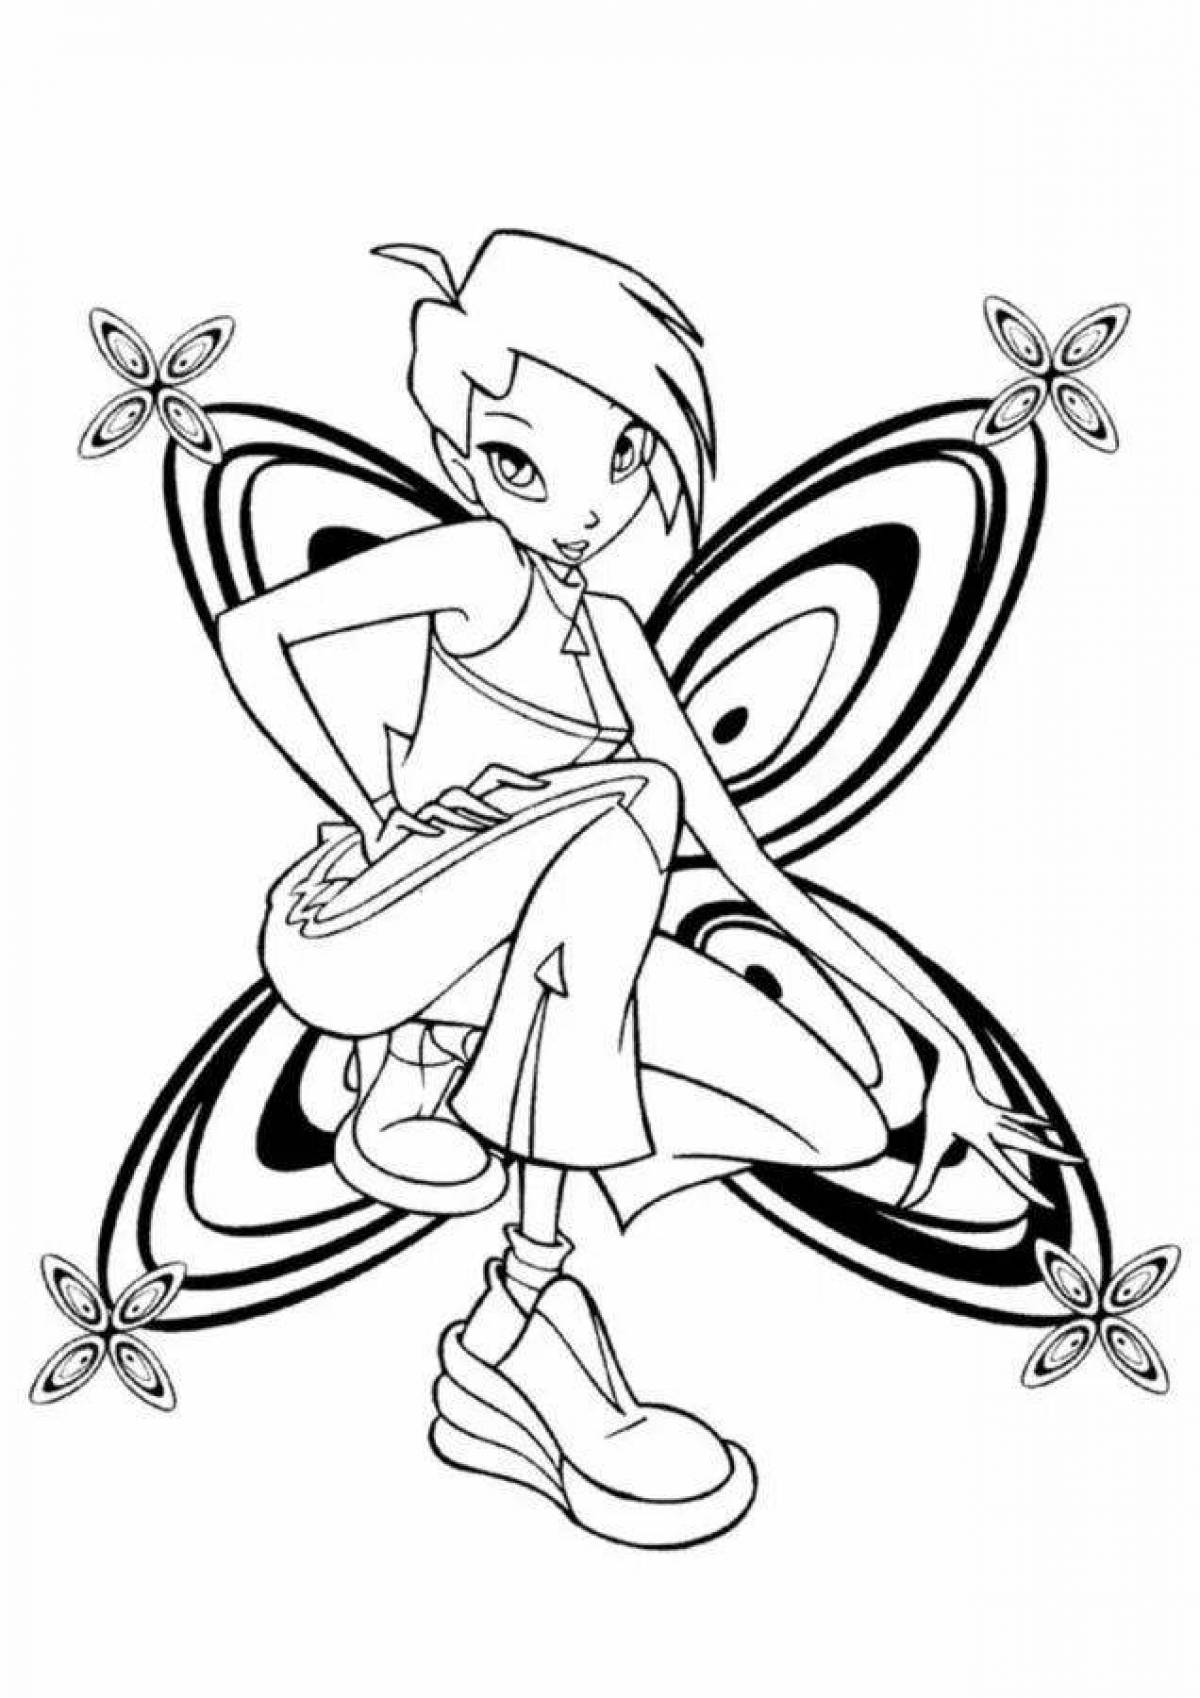 Winx games funny coloring book